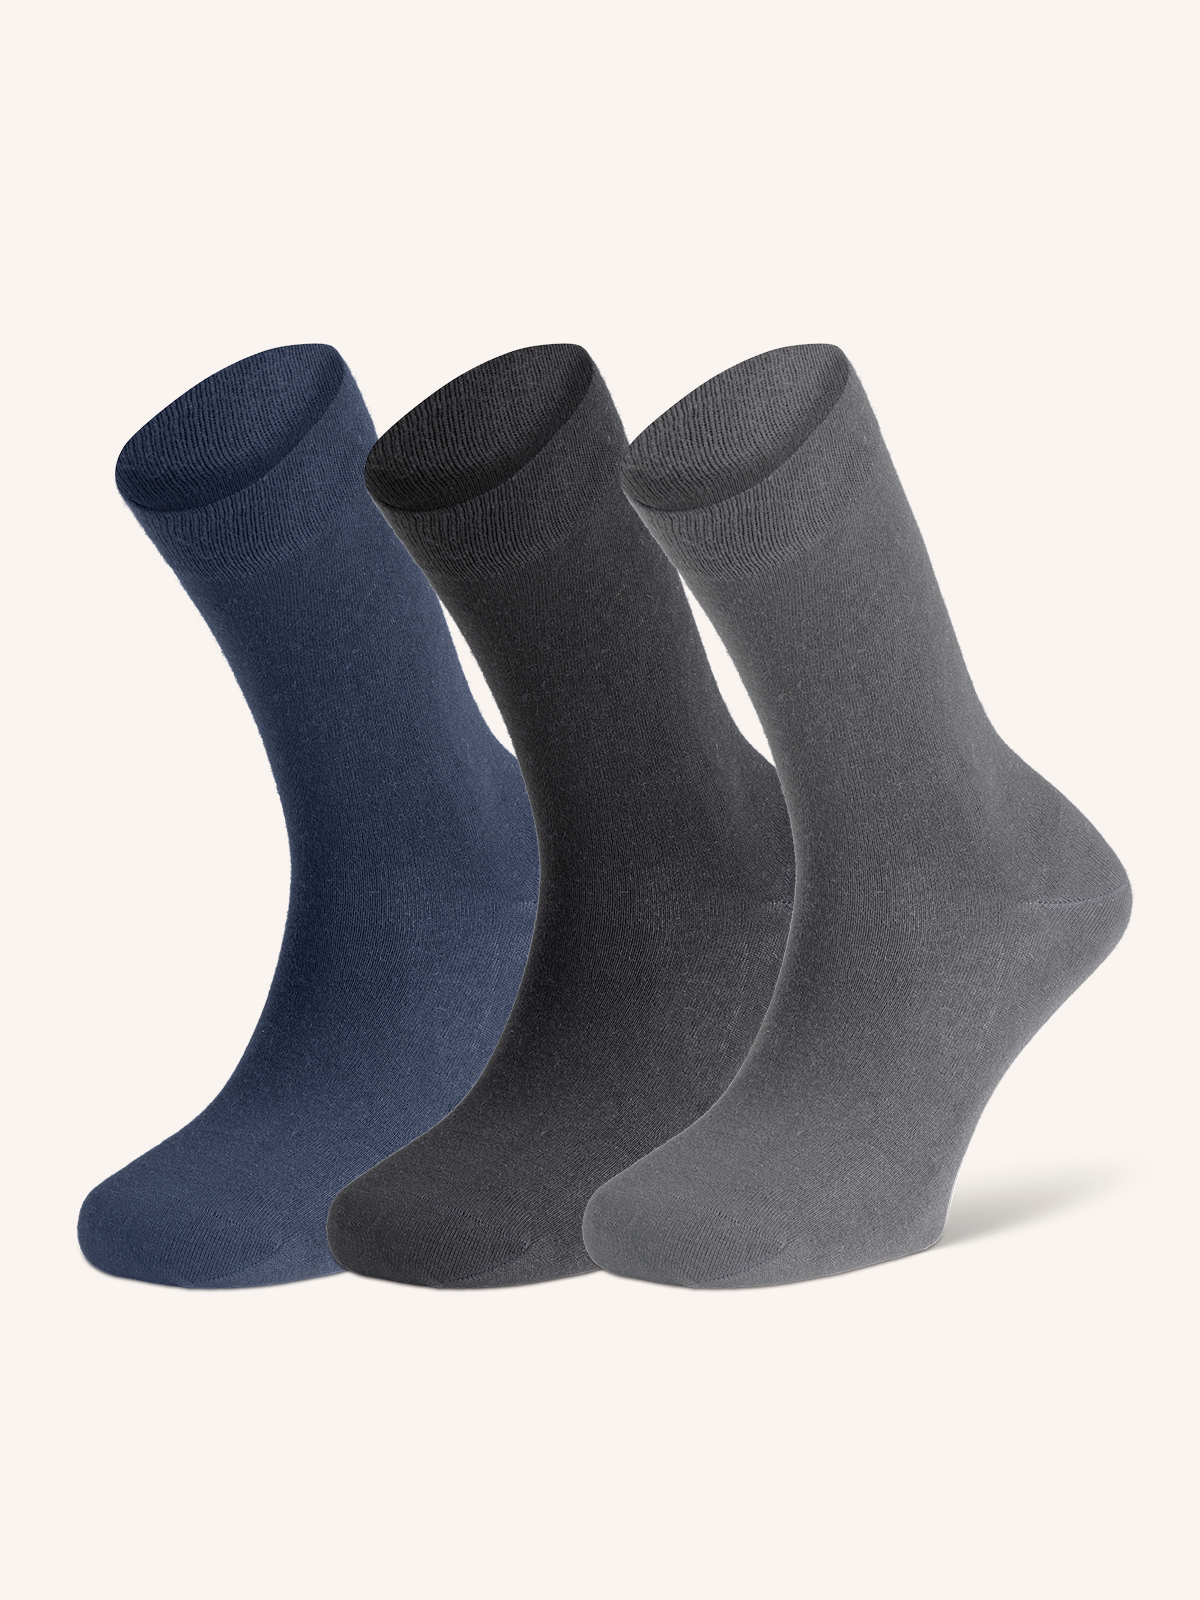 Short Sock in Organic Cotton for Men | Plain Color | Pack of 3 Pairs | Bio Cotton UC